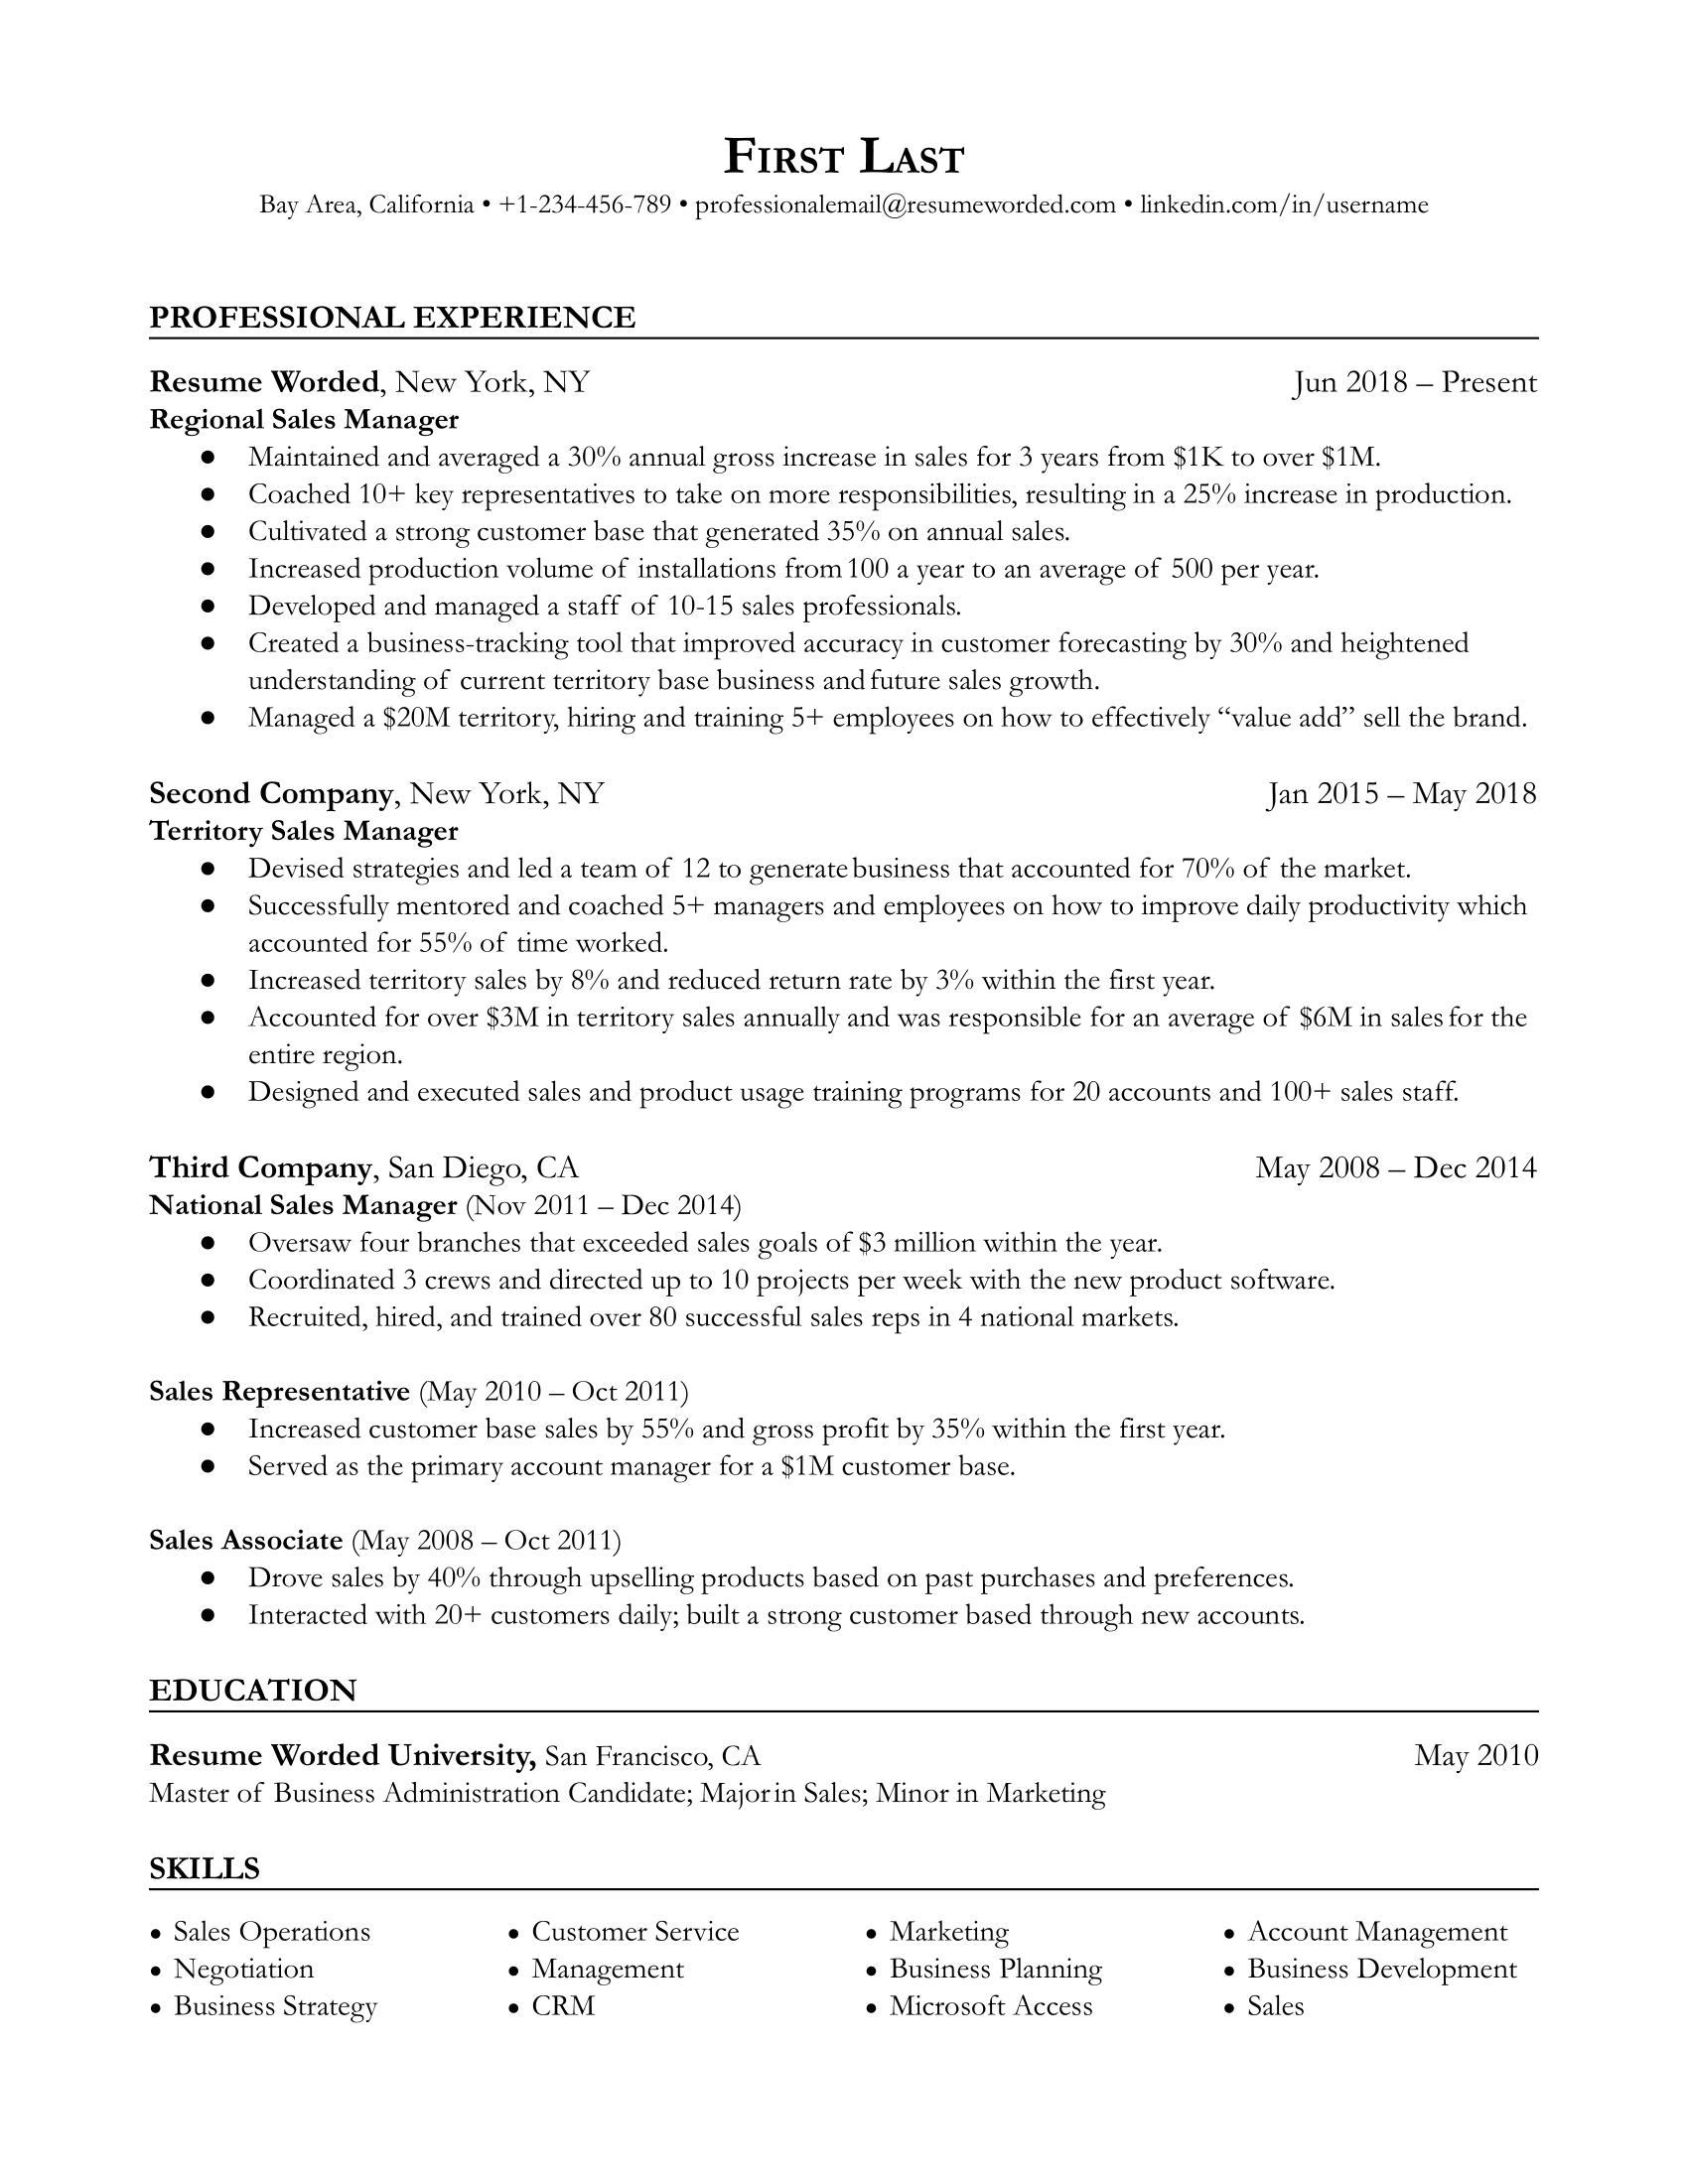 Regional Sales Manager resume featuring leadership and sales achievements.